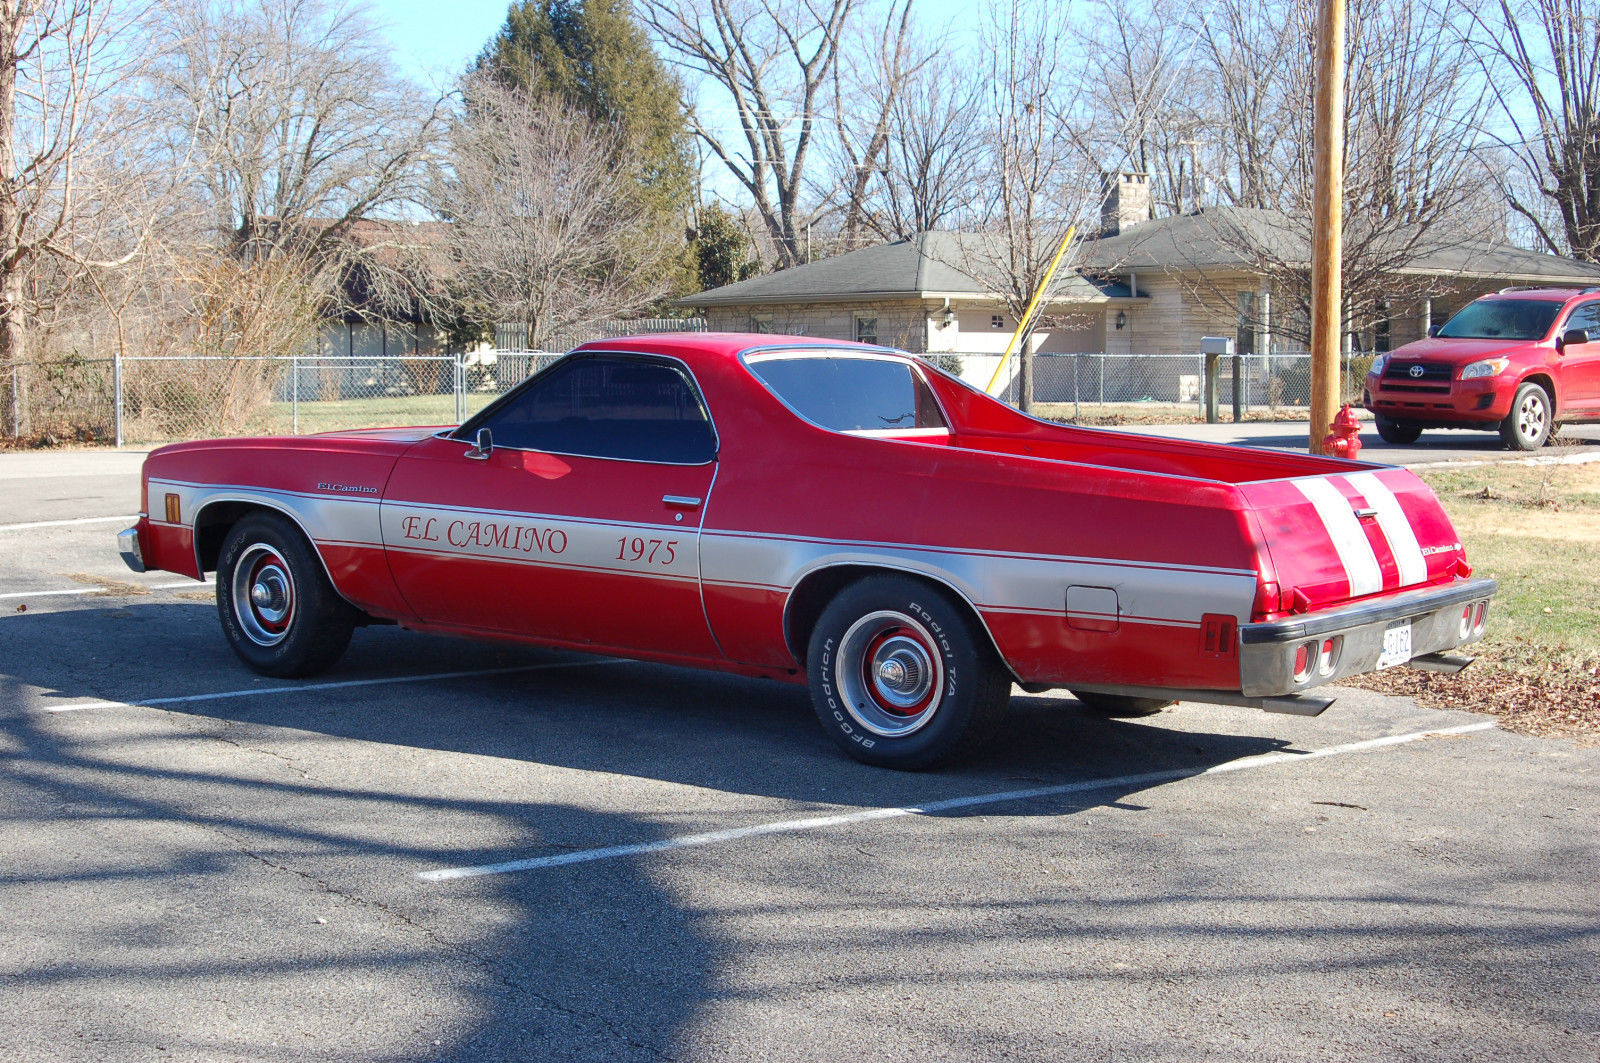 1975 Chevrolet El Camino for sale in Clay City, Kentucky, United States.